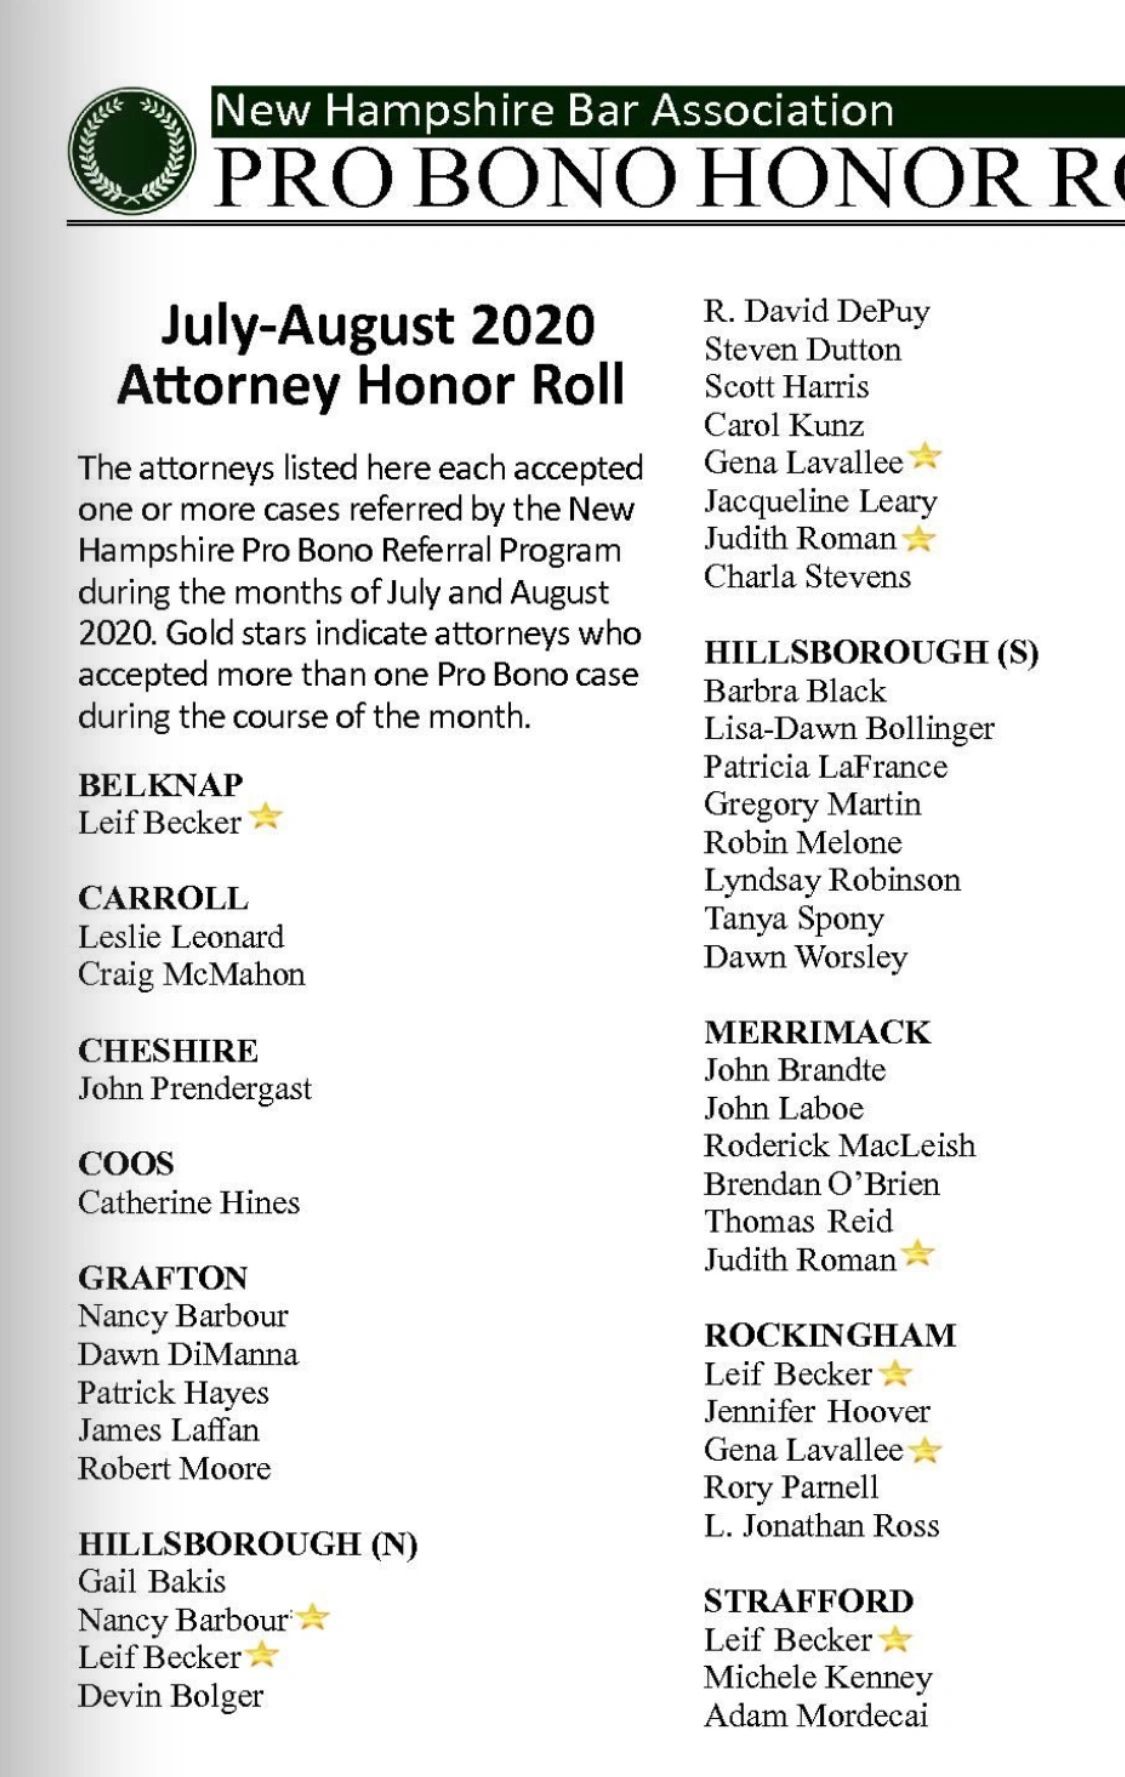 Attorney Becker recognized in the New Hampshire Pro Bono honor roll for providing pro bono services to clients across four counties in the months of July and August 2020